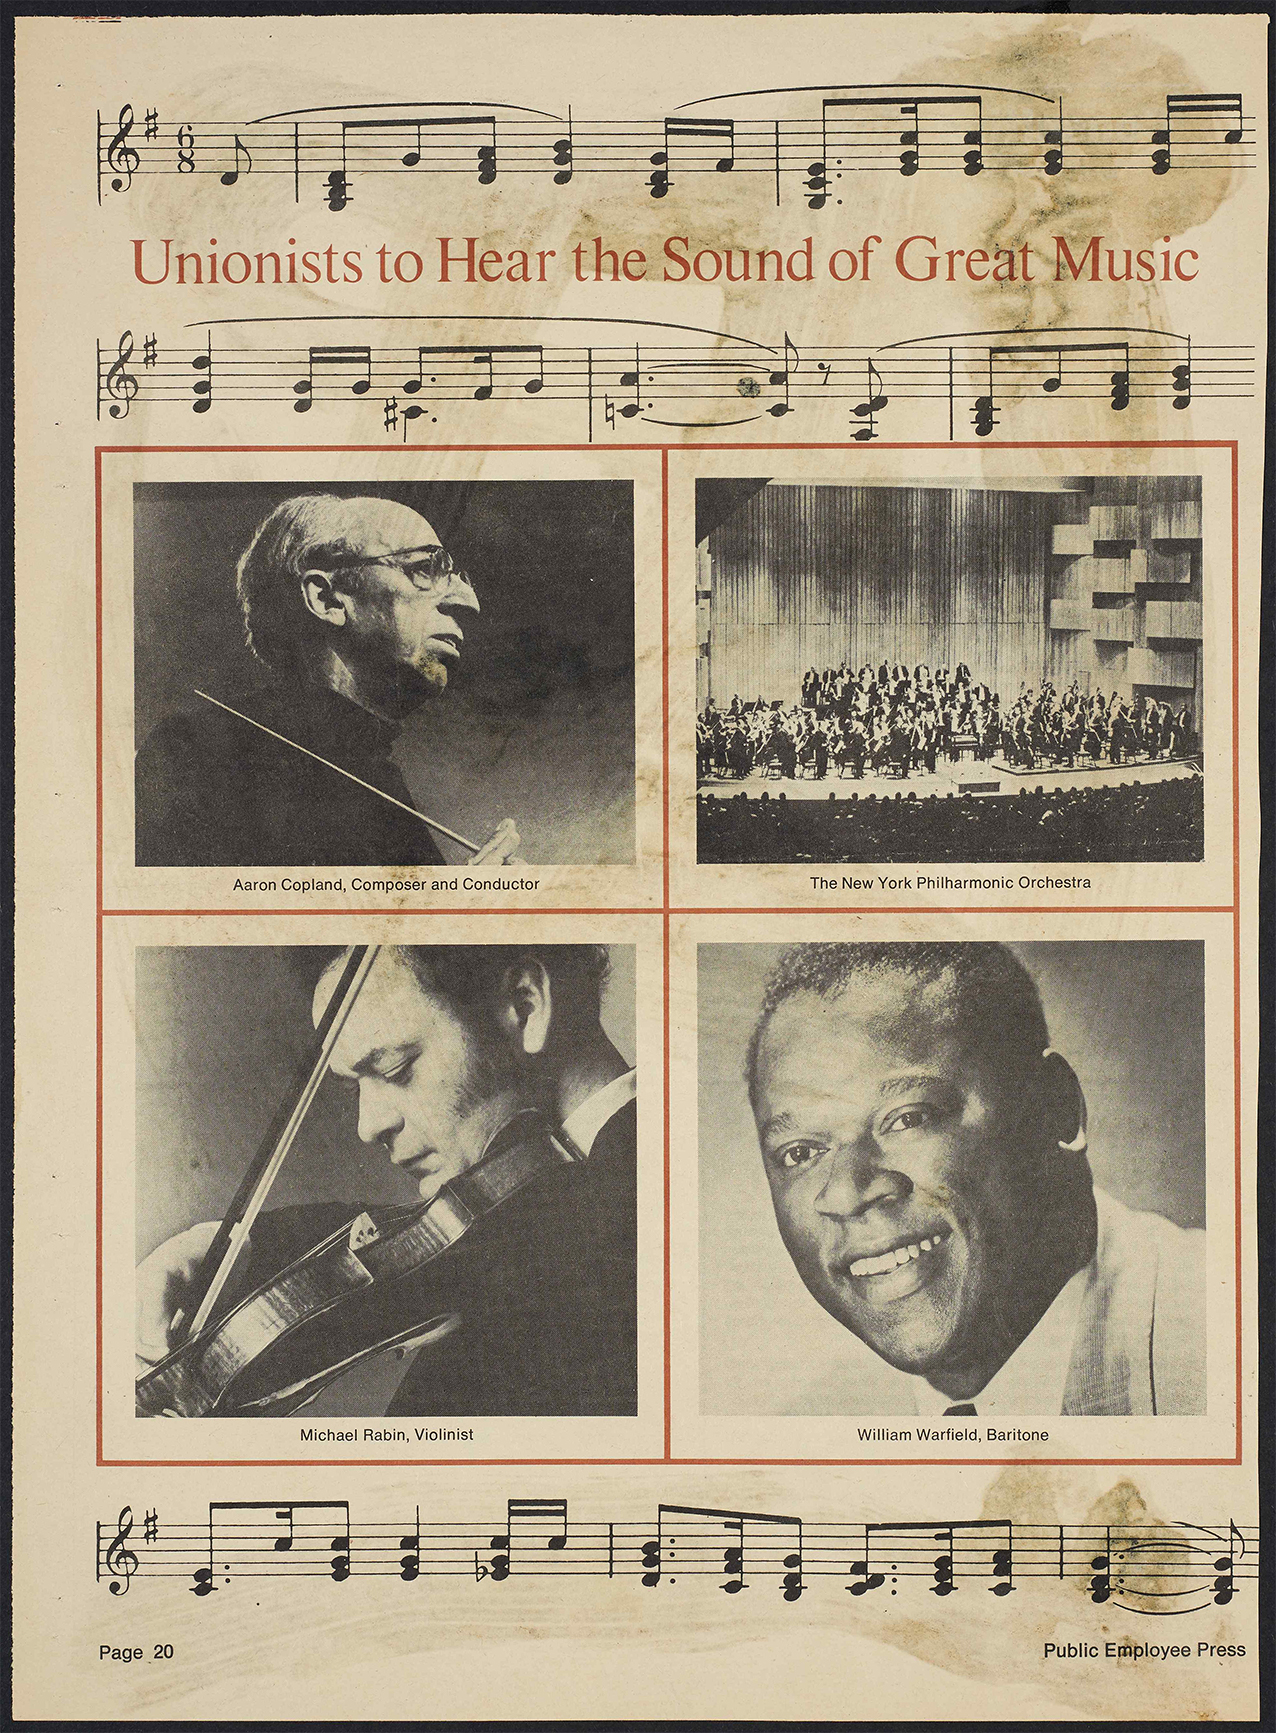 A newspaper advertising the Experience in Music Series. The headline reads Unionists to Hear the Sound of Great Music and below that are pictures of composer/conductor Aaron Copland, the New York Philharmonic, violinist Michael Rabin, and bass-baritone William Warfield.